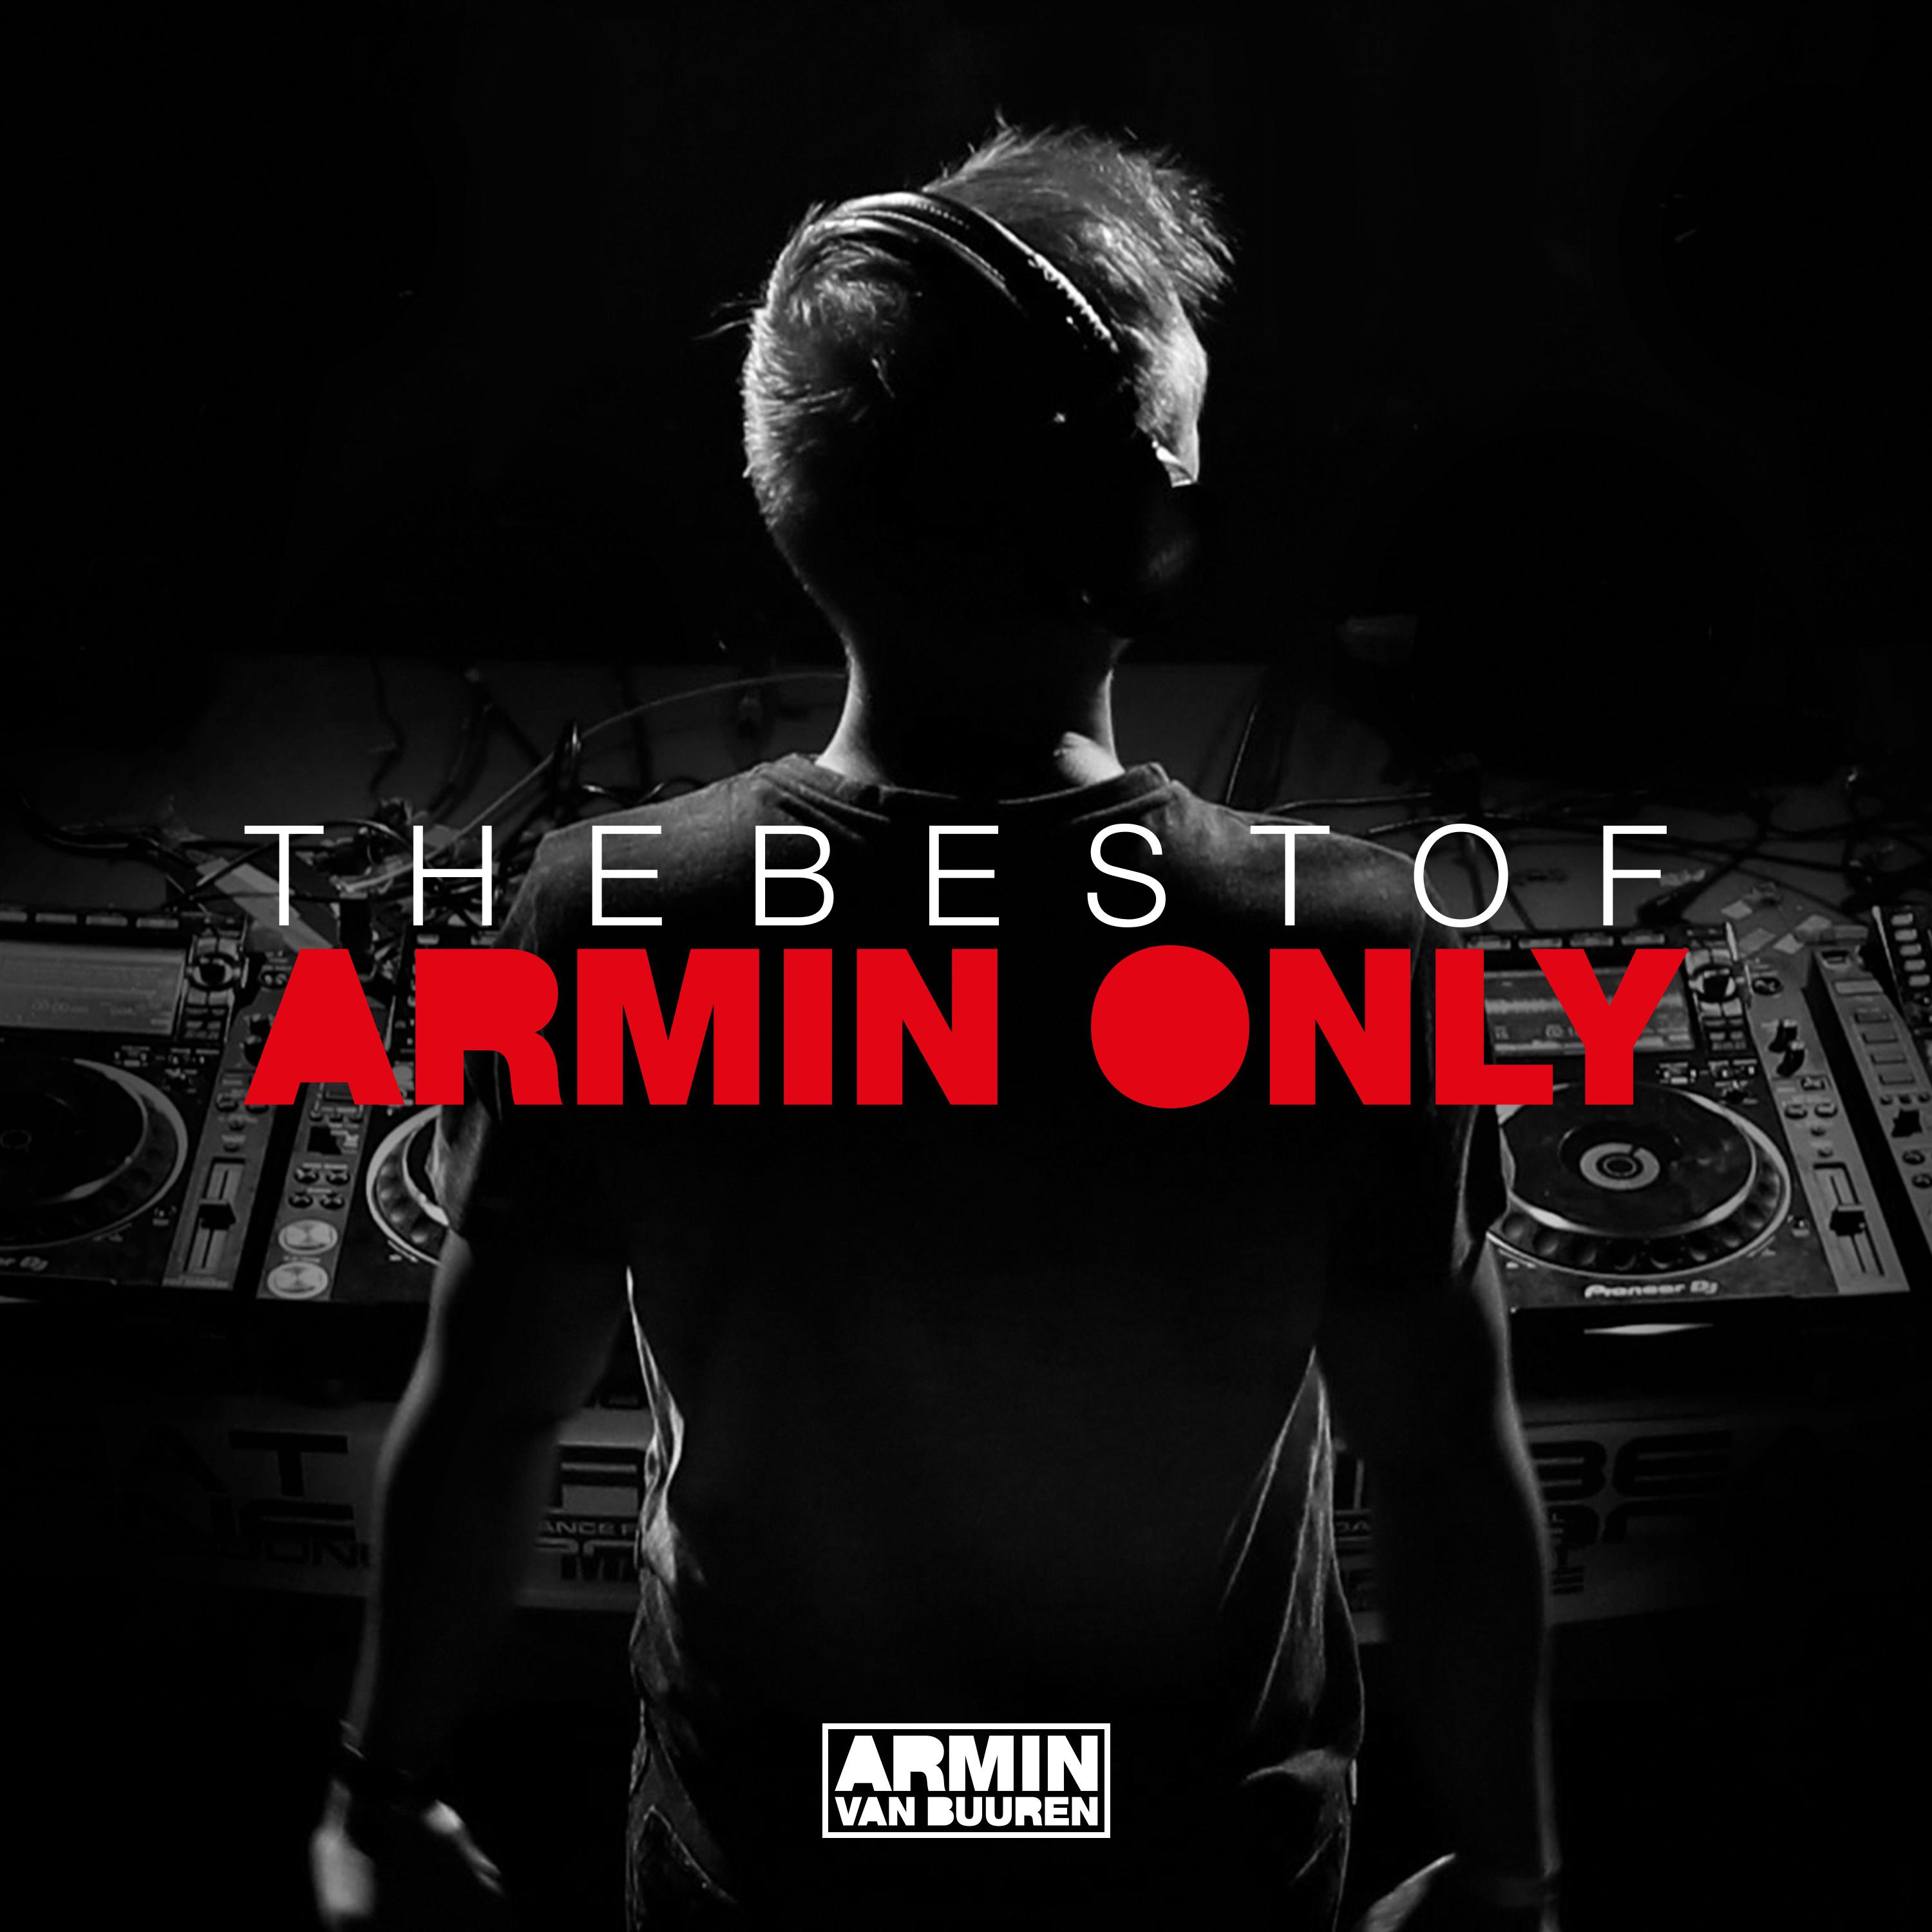 Overture (The Best Of Armin Only) (I. Imagine)